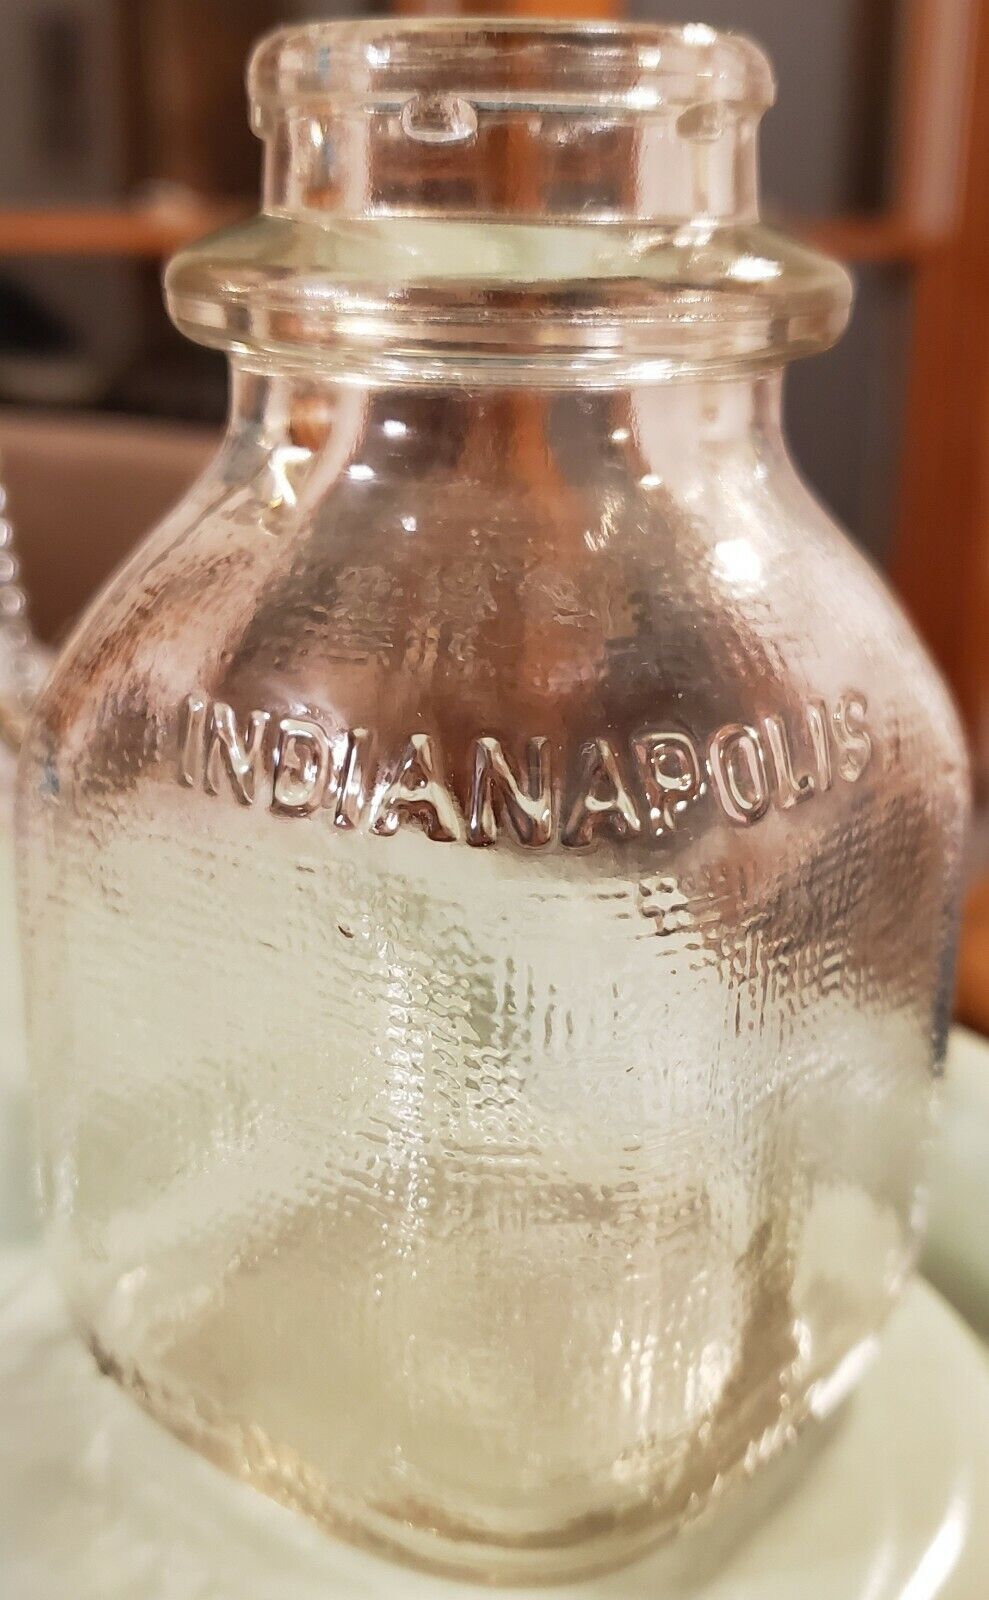 1959 MBS Indianapolis IN half 1/2 pt pint square milk bottle clear glass 